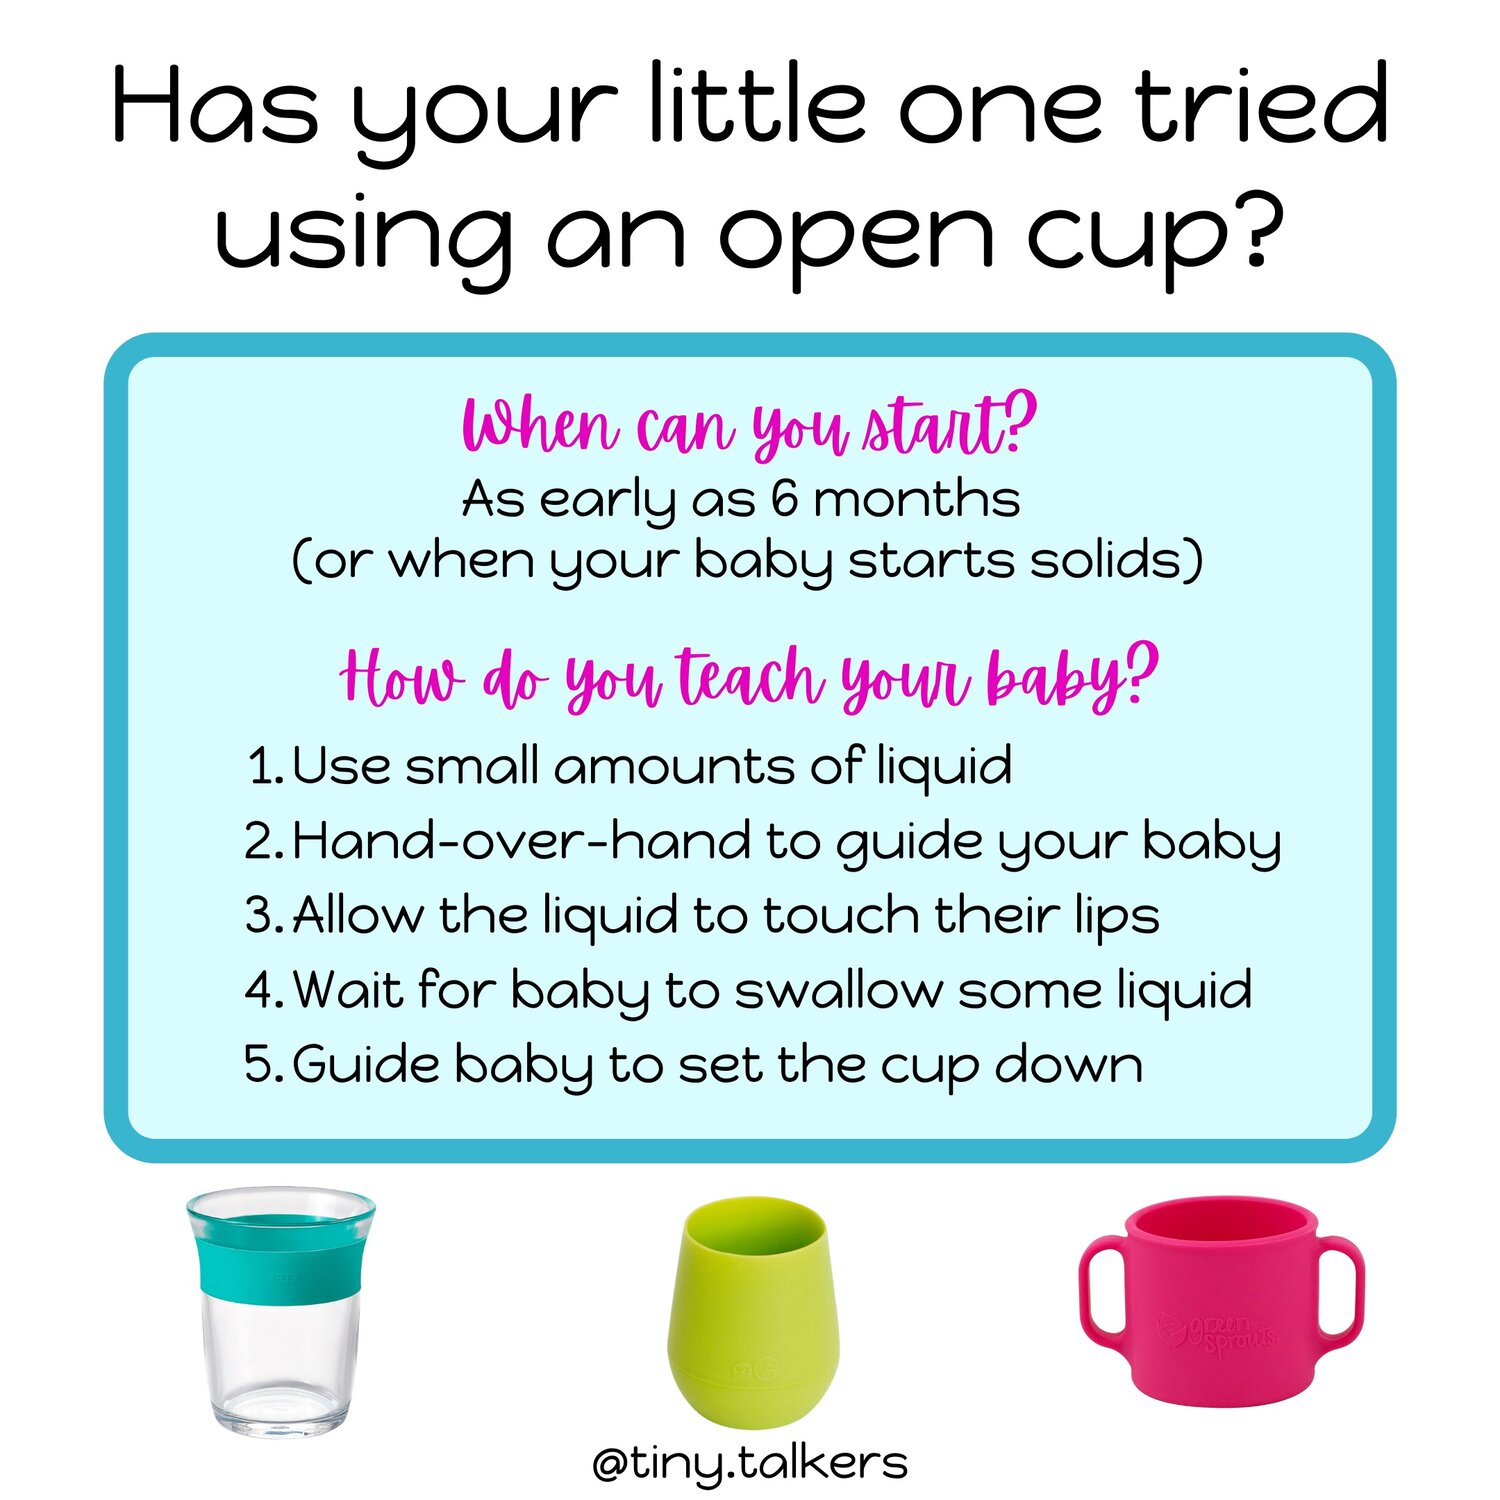 Best Cups for Baby – Sharon Mazel